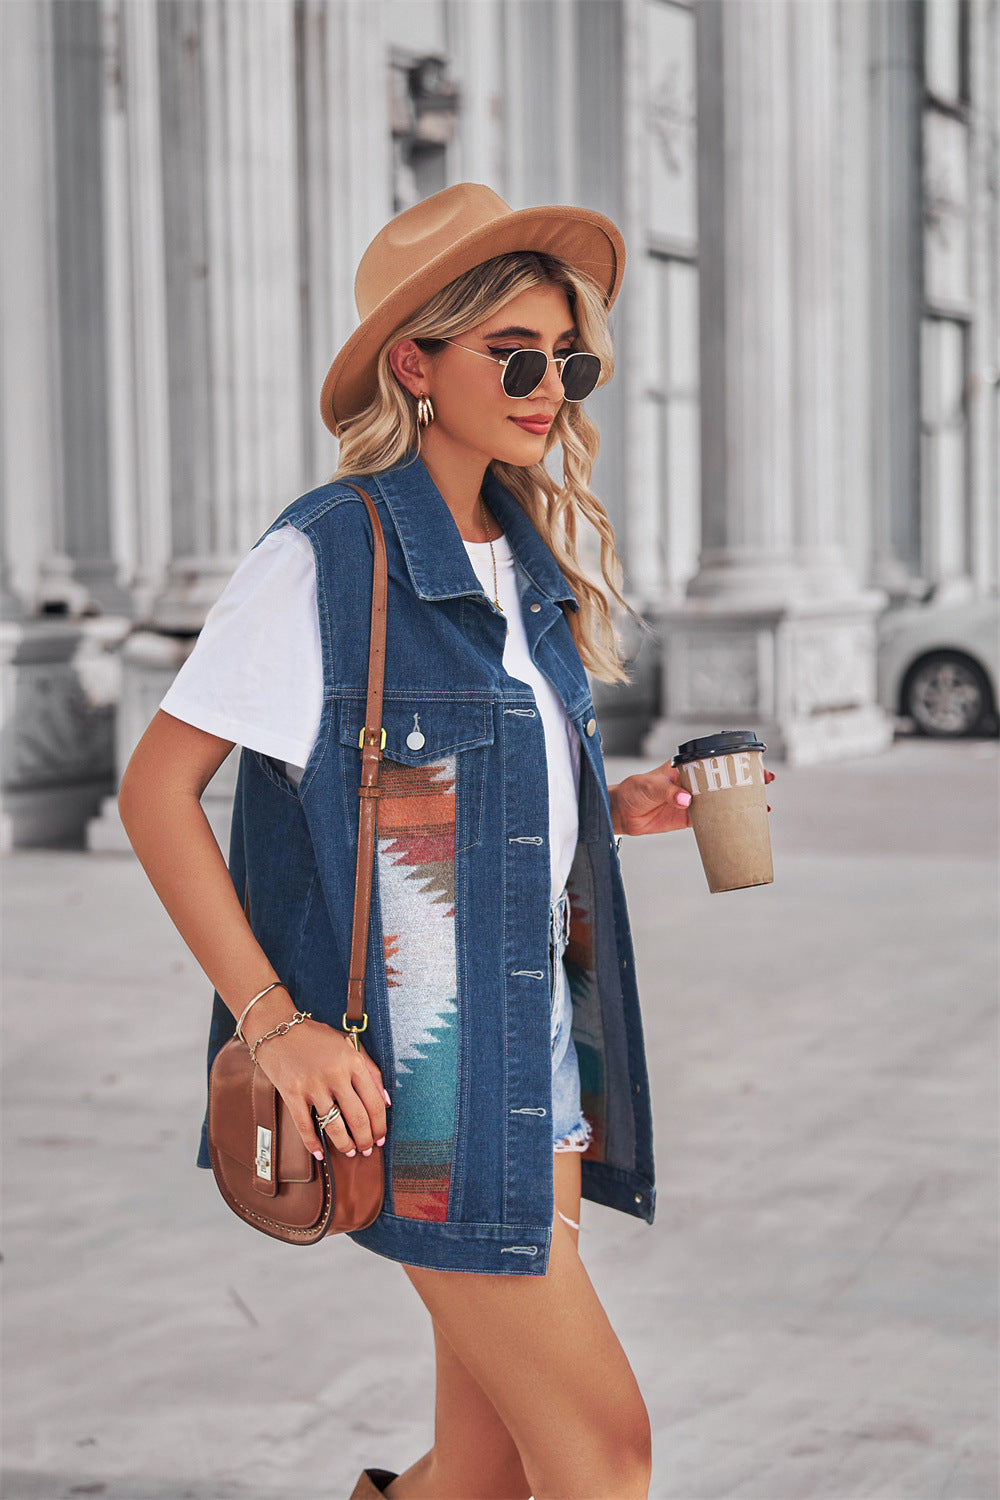 Geometric Abstract Denim Color Matching Vest Coat Loose Casual Women